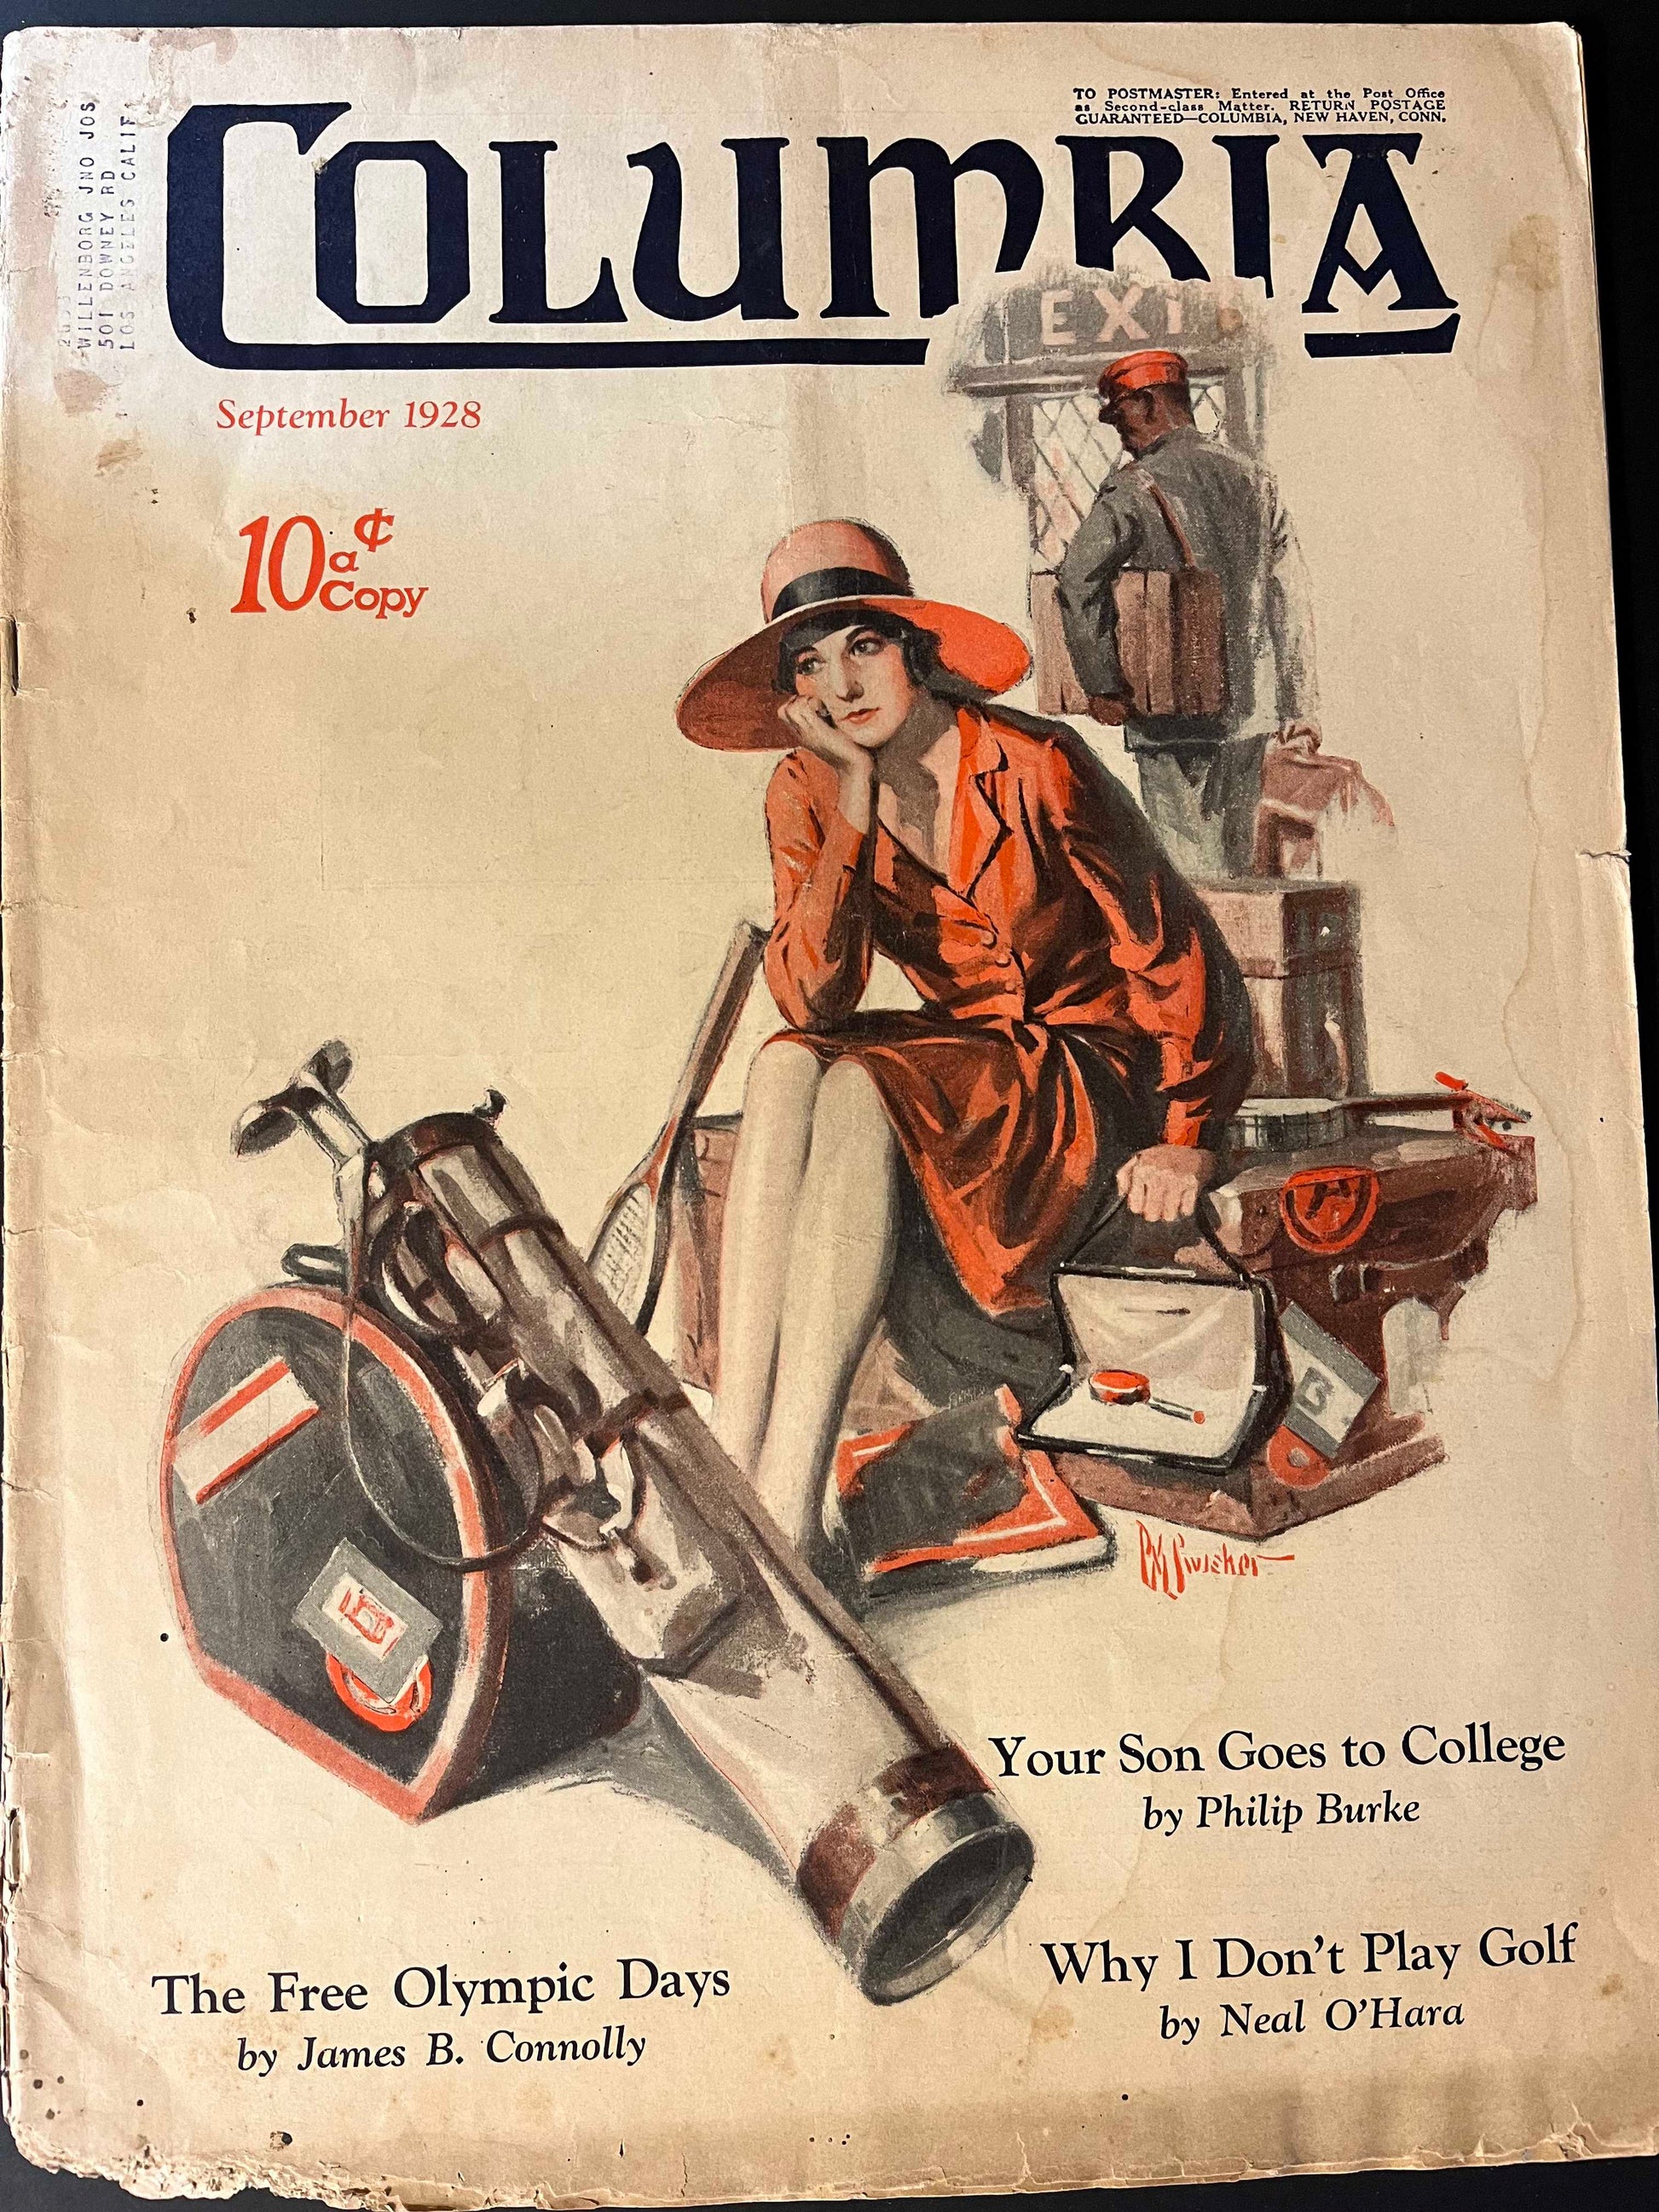 Summary of What is Shown in the Photo: The cover of this September 1928 Columbia Magazine features an elegant woman in a striking orange dress and hat, evoking the quintessential flapper style. She's portrayed alongside the tools of golf, symbolizing the leisure pursuits of the time. The backdrop features a subdued scene of a man with a golf bag, adding depth and narrative to this beautifully illustrated cover.